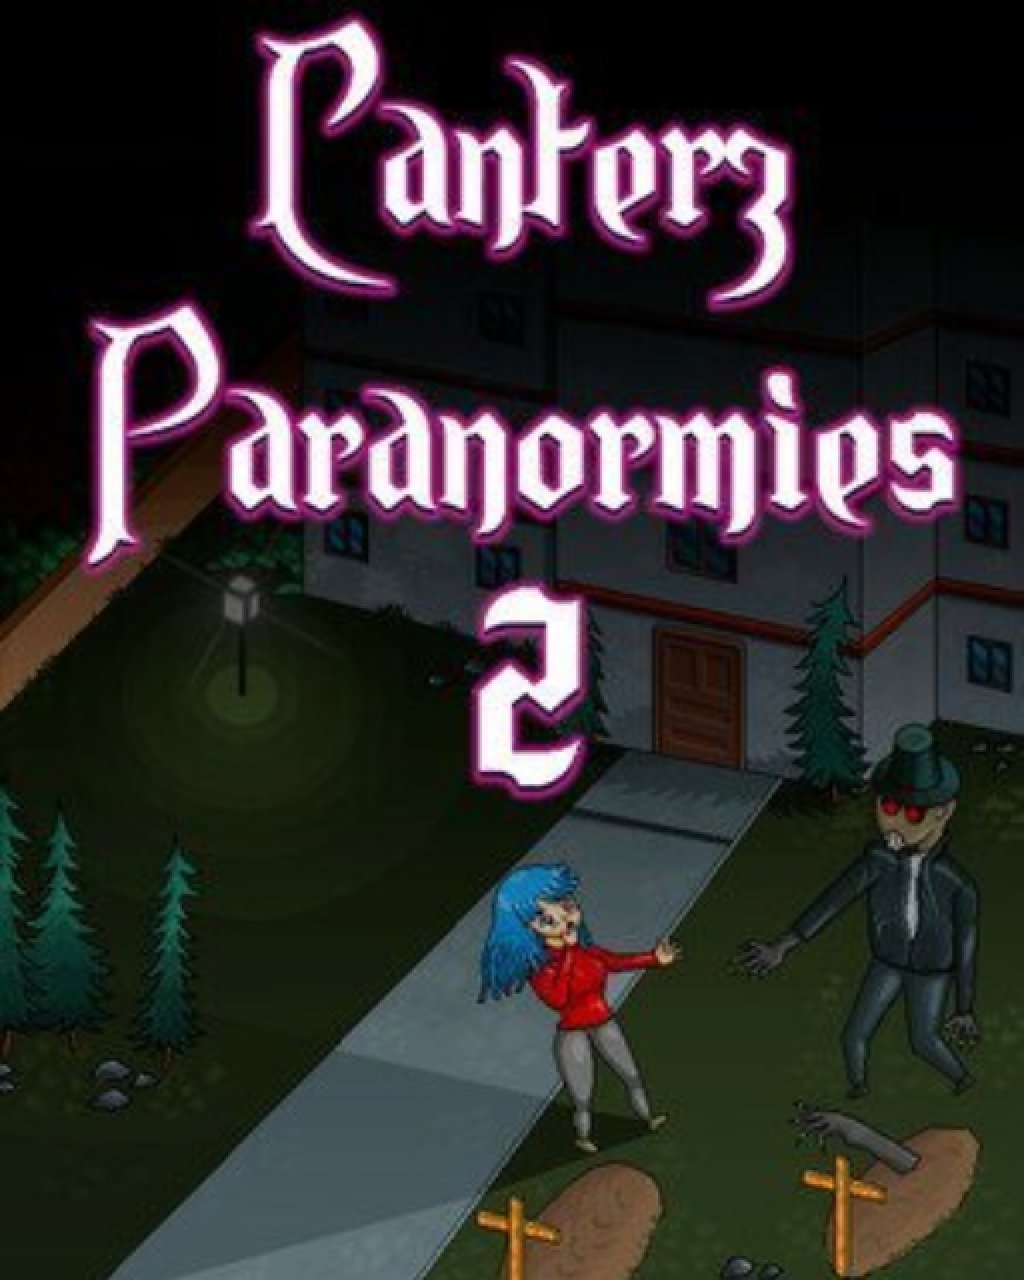 Canterz Paranormies 2